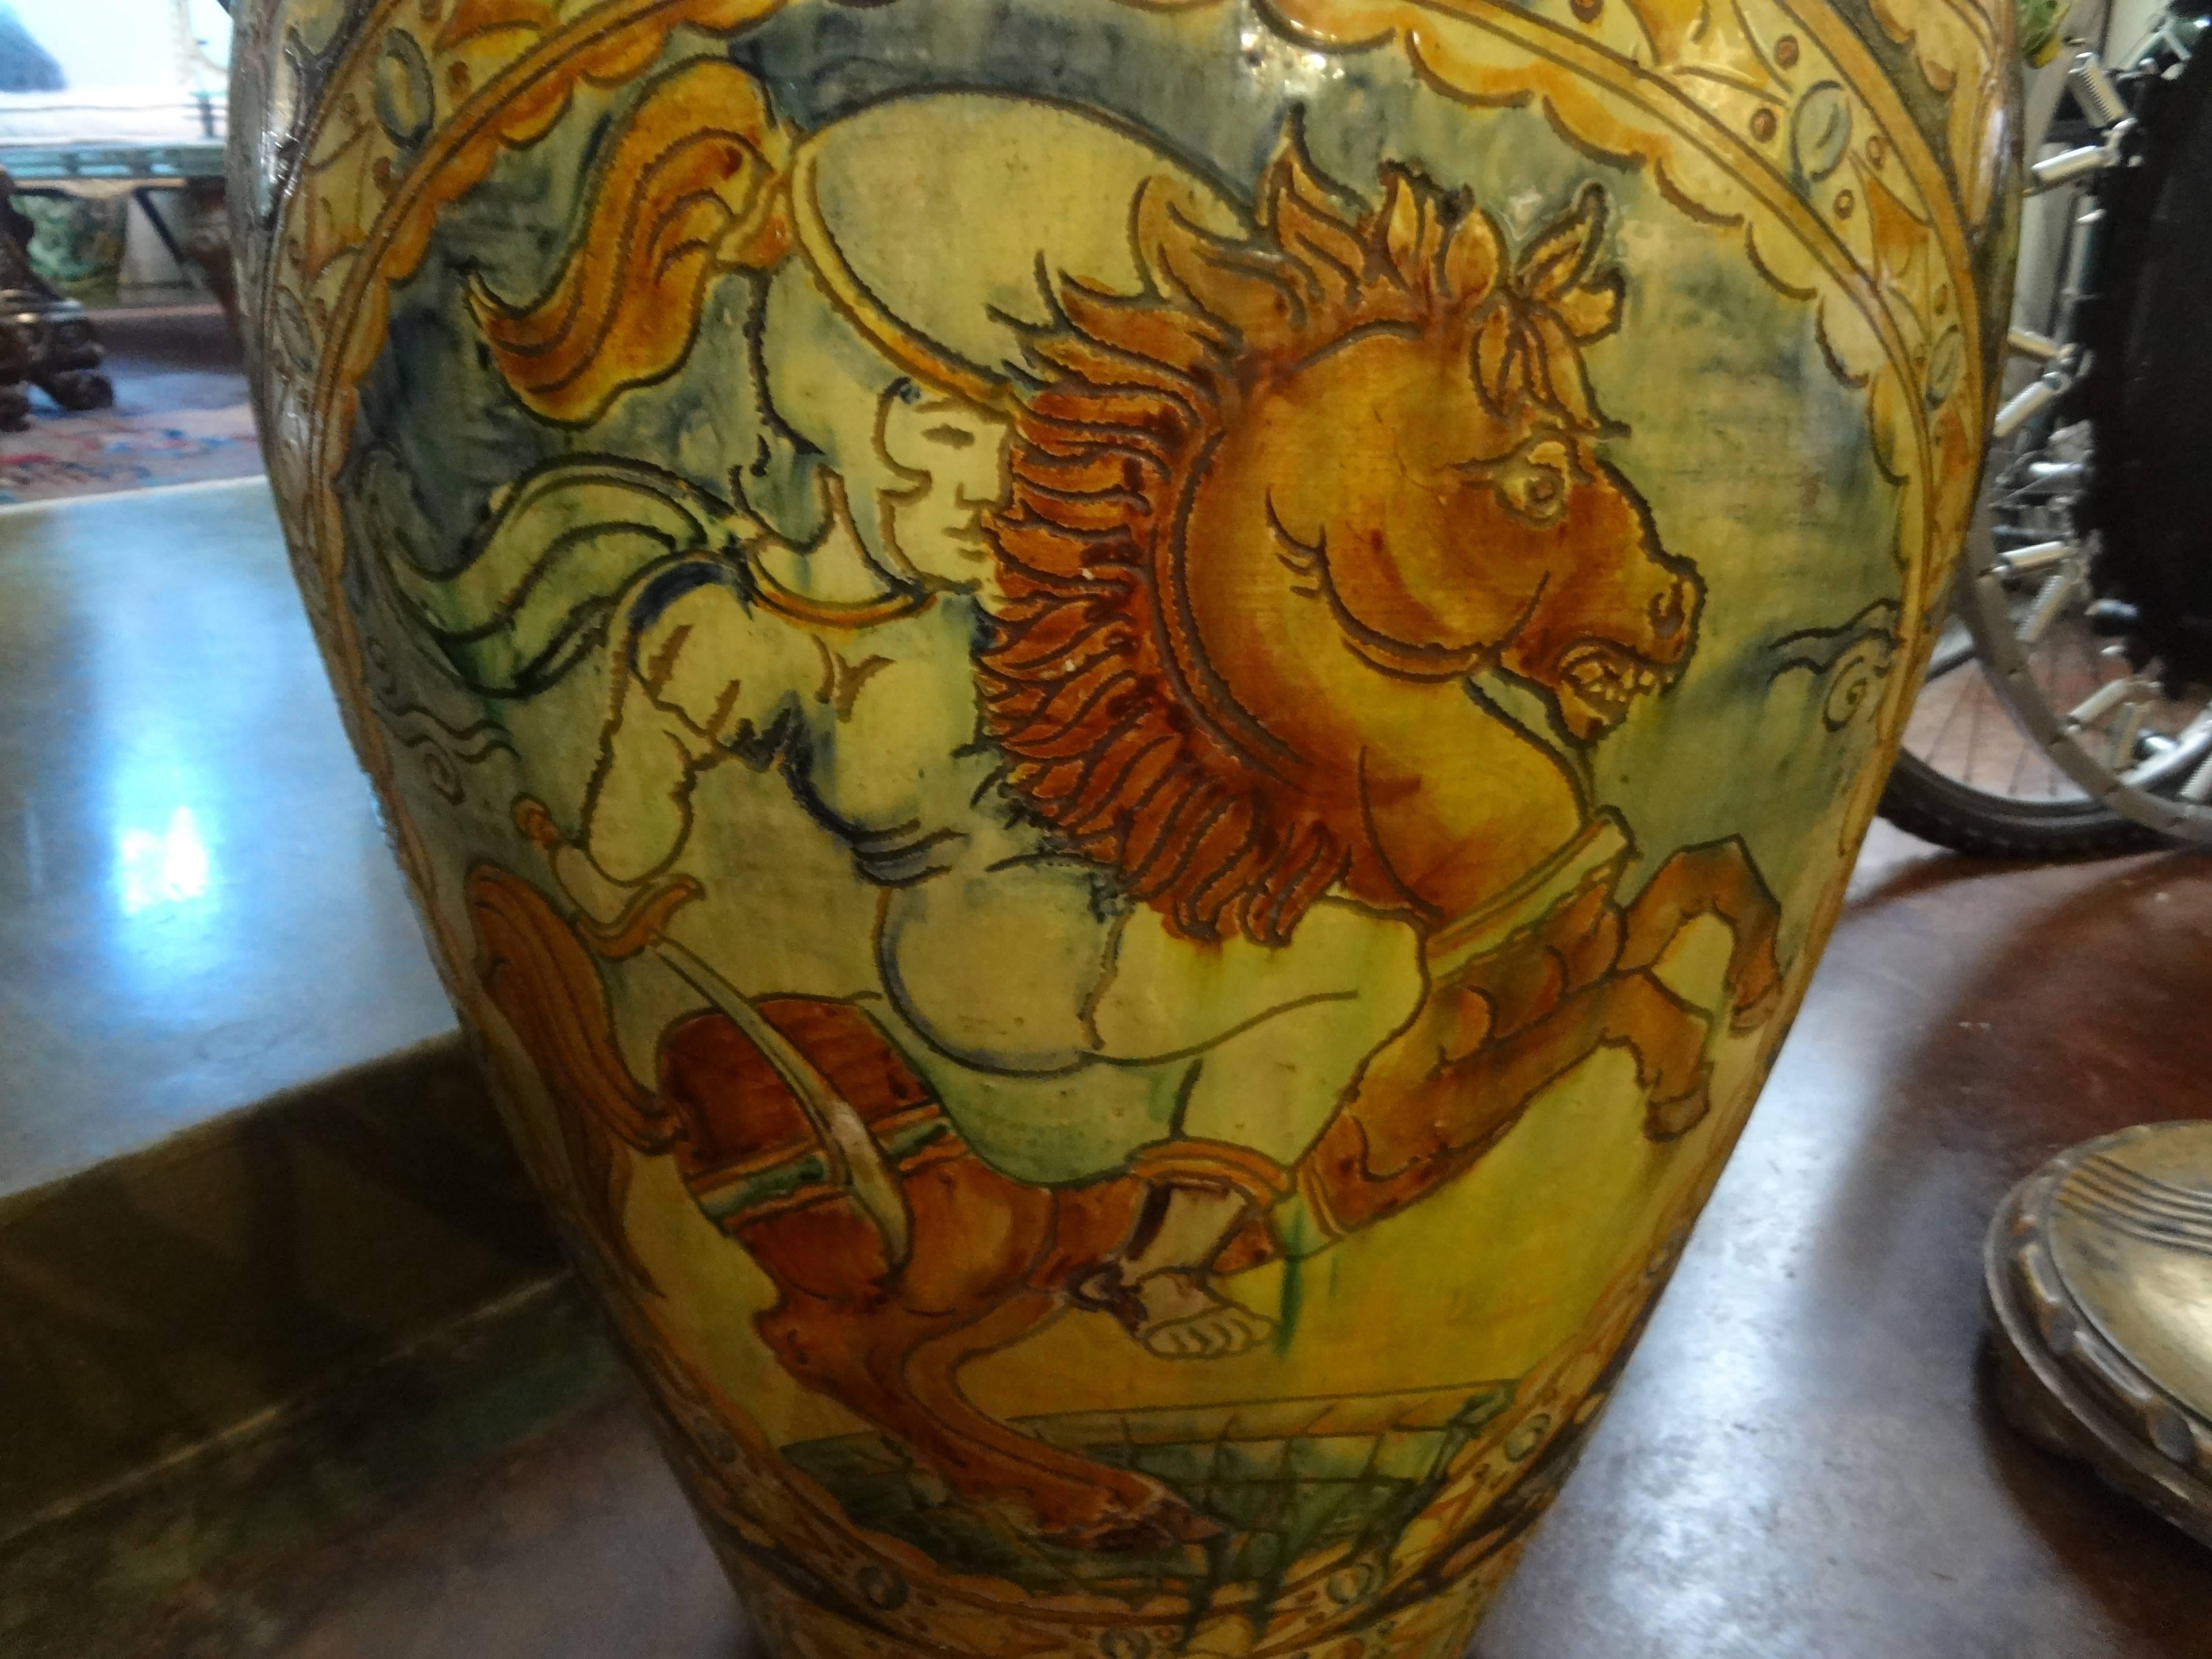 Large Italian Glazed Terracotta Urn with stylized Horse.
Italian glazed terracotta Urbino Maiolica style urn or vessel in muted colors with well detailed horse motif and lion heads as handles on either side, circa 1920. Measures: 28.5” H. This